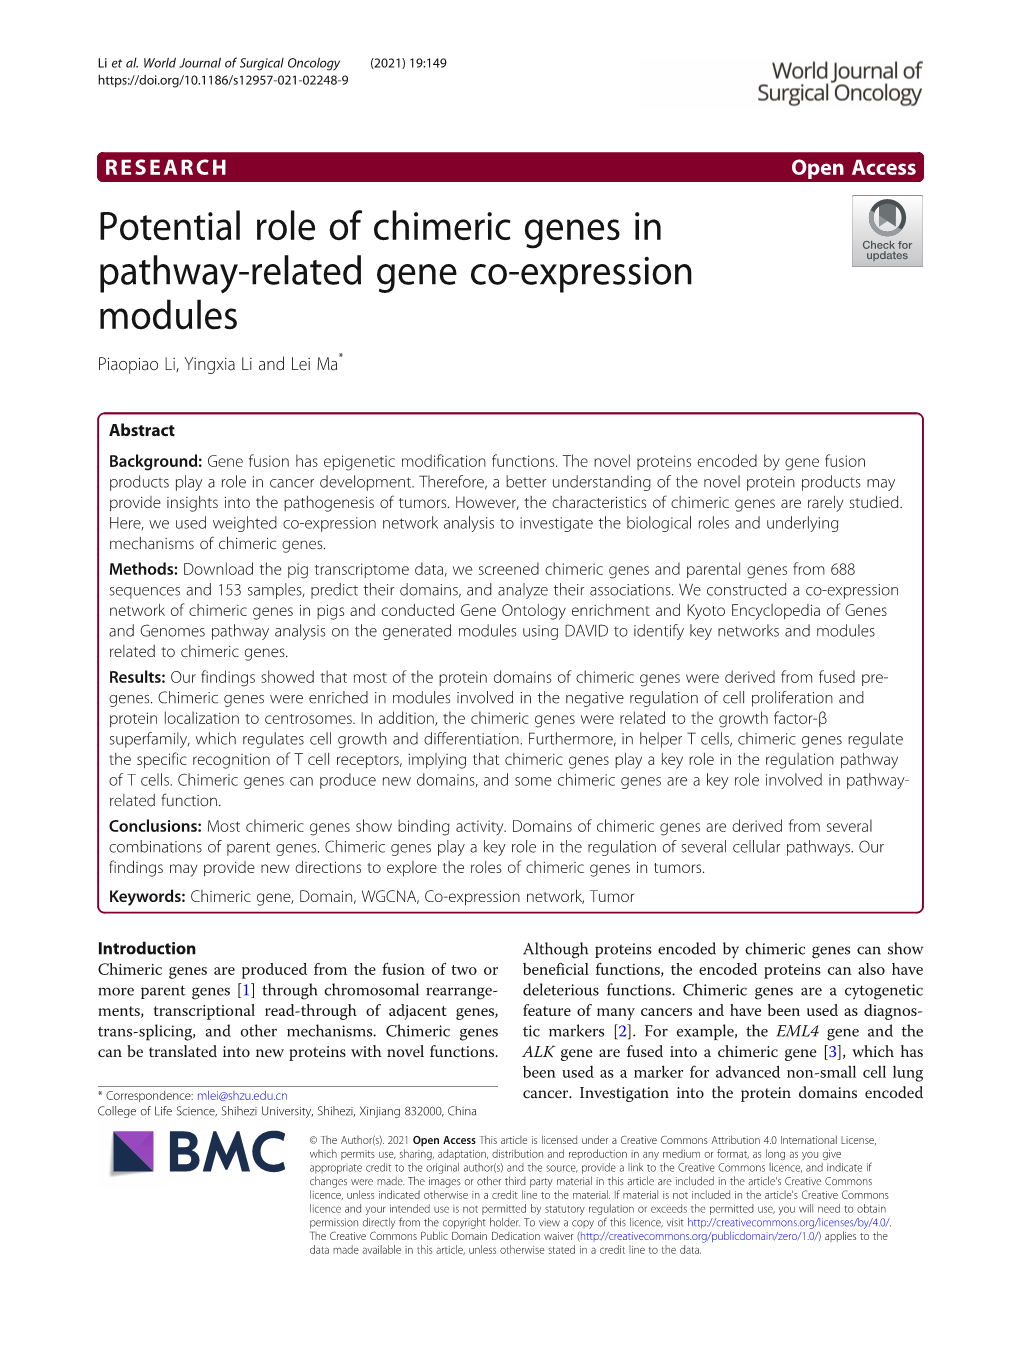 Potential Role of Chimeric Genes in Pathway-Related Gene Co-Expression Modules Piaopiao Li, Yingxia Li and Lei Ma*